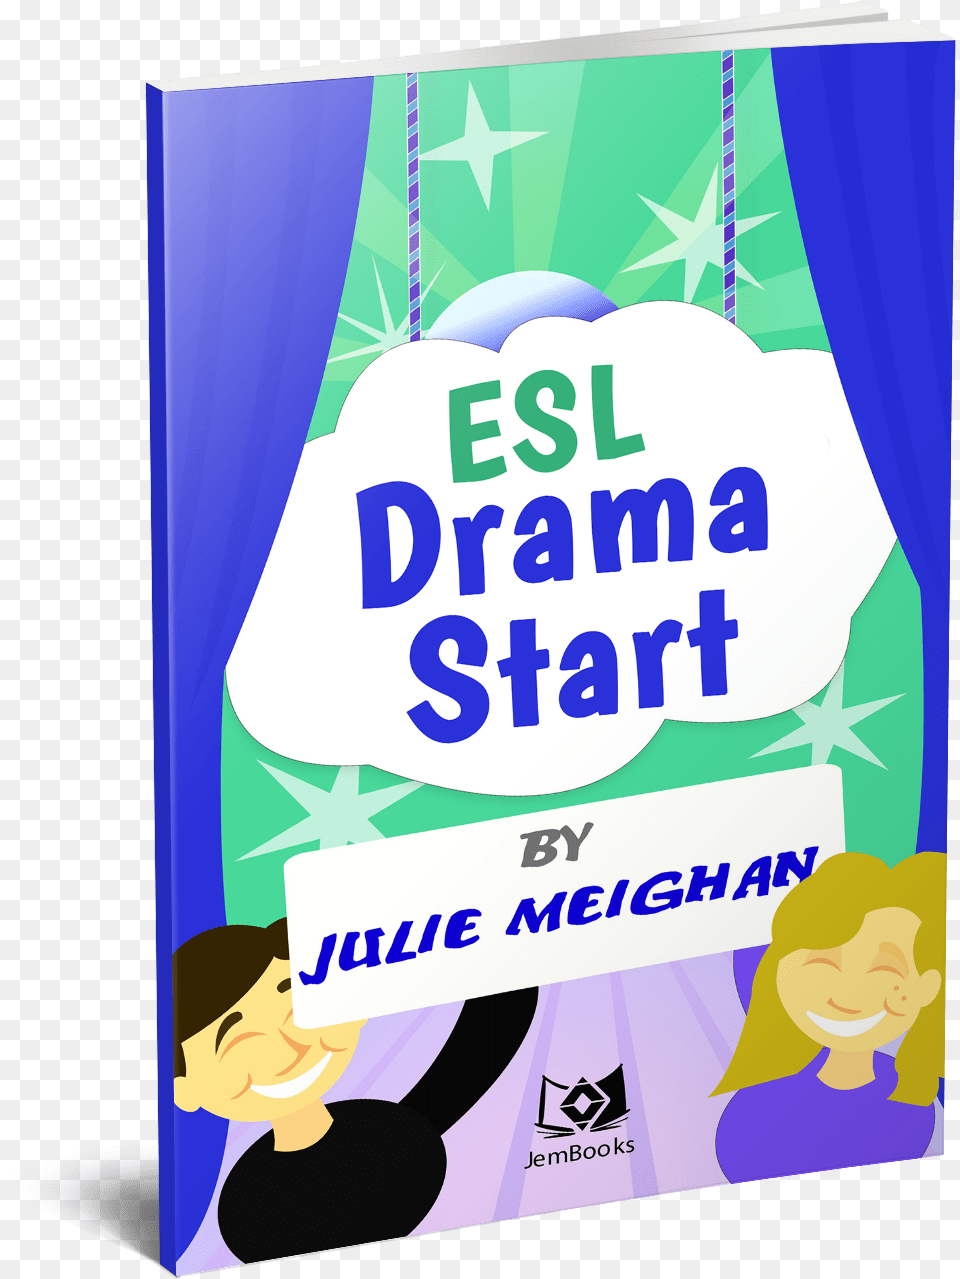 Esl Drama Start Julie Meighan, Advertisement, Poster, Baby, Person Png